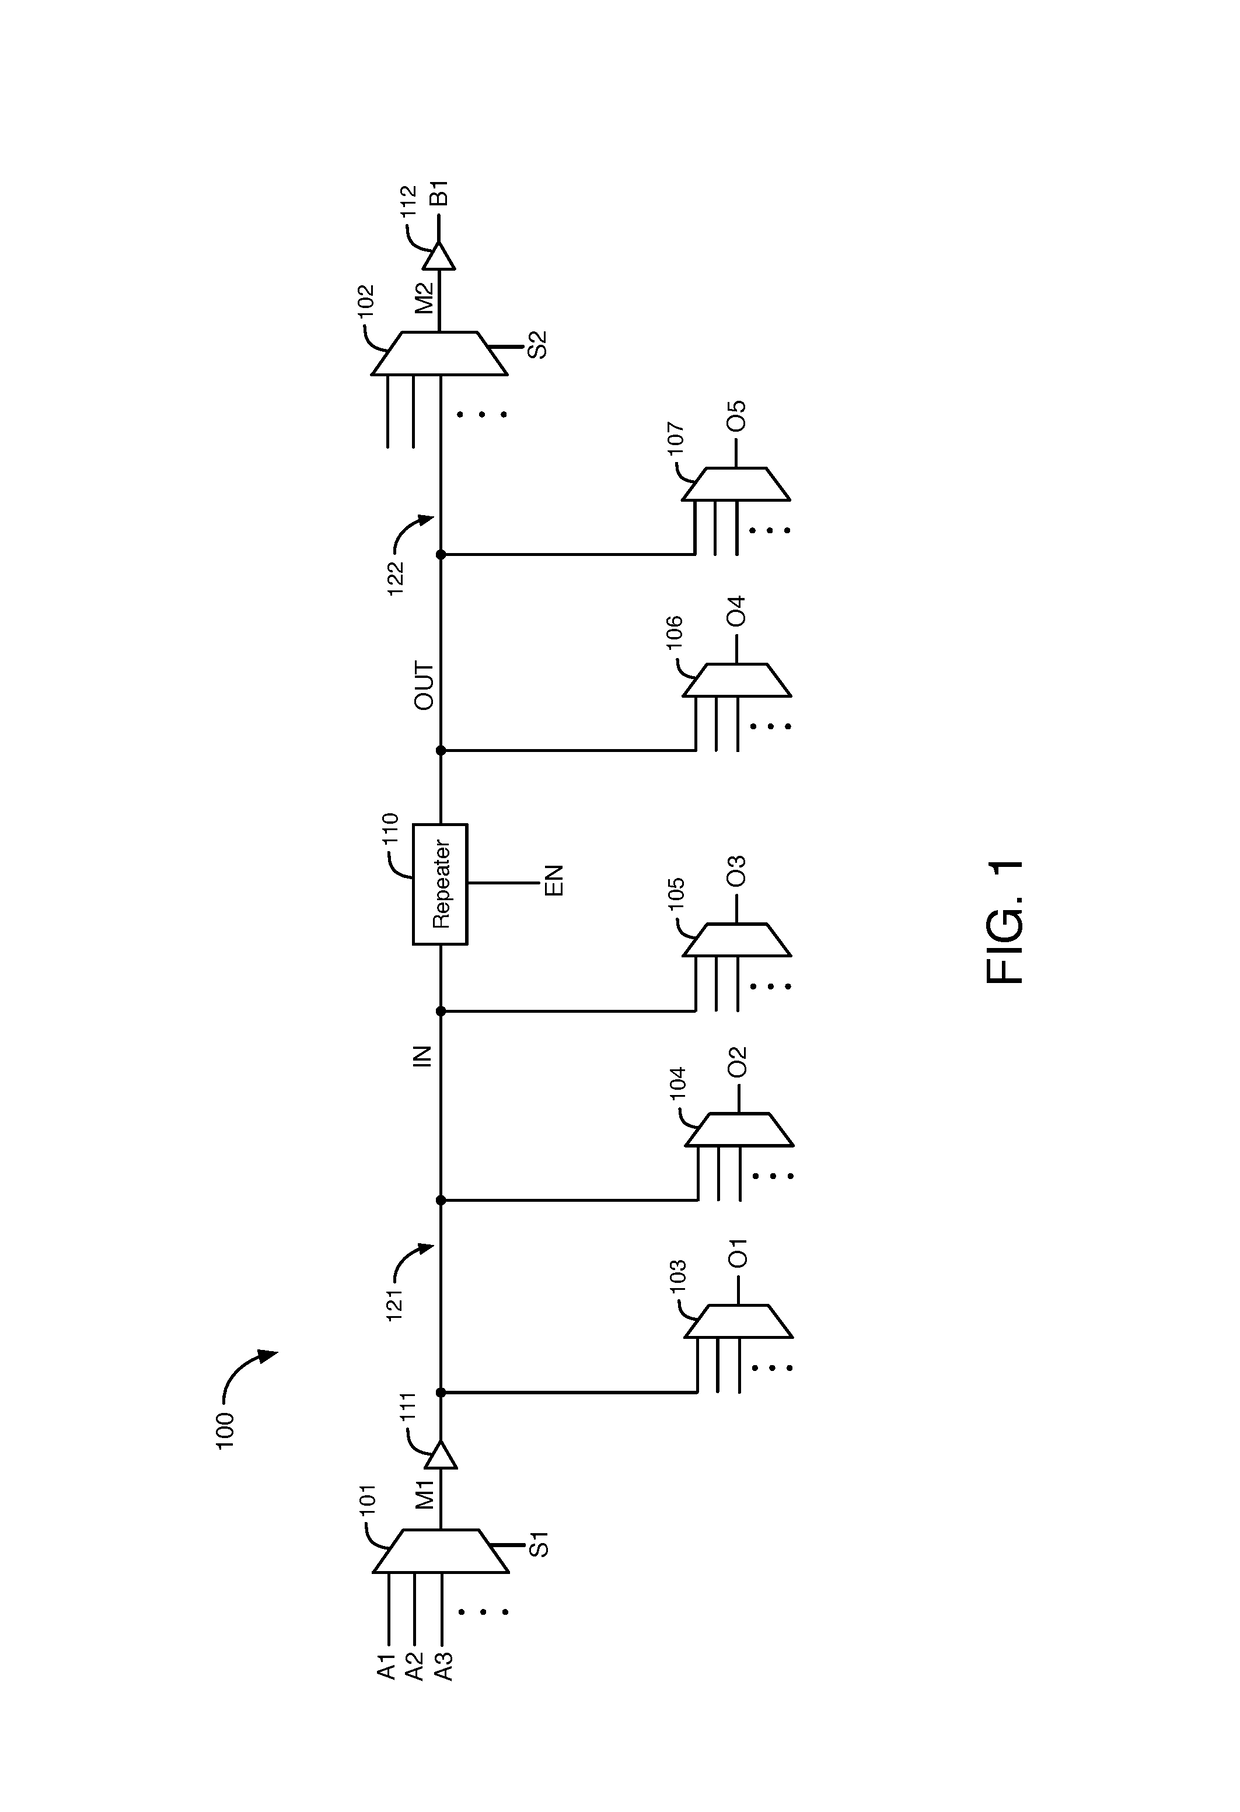 Programmable repeater circuits and methods